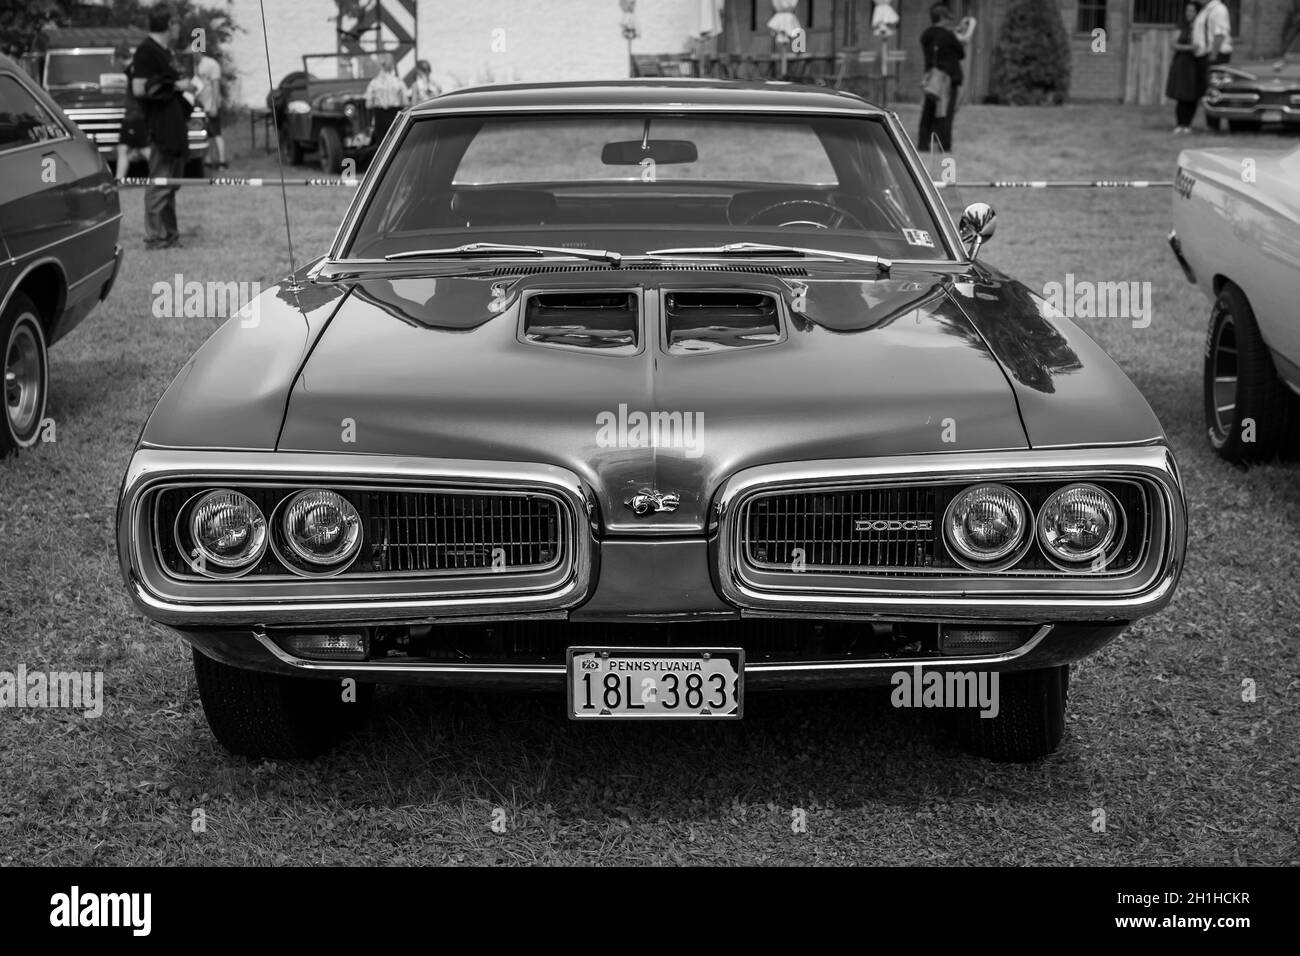 DIEDERSDORF, GERMANY - AUGUST 30, 2020: The muscle car Dodge Super Bee, 1968. Black and white. The exhibition of 'US Car Classics'. Stock Photo